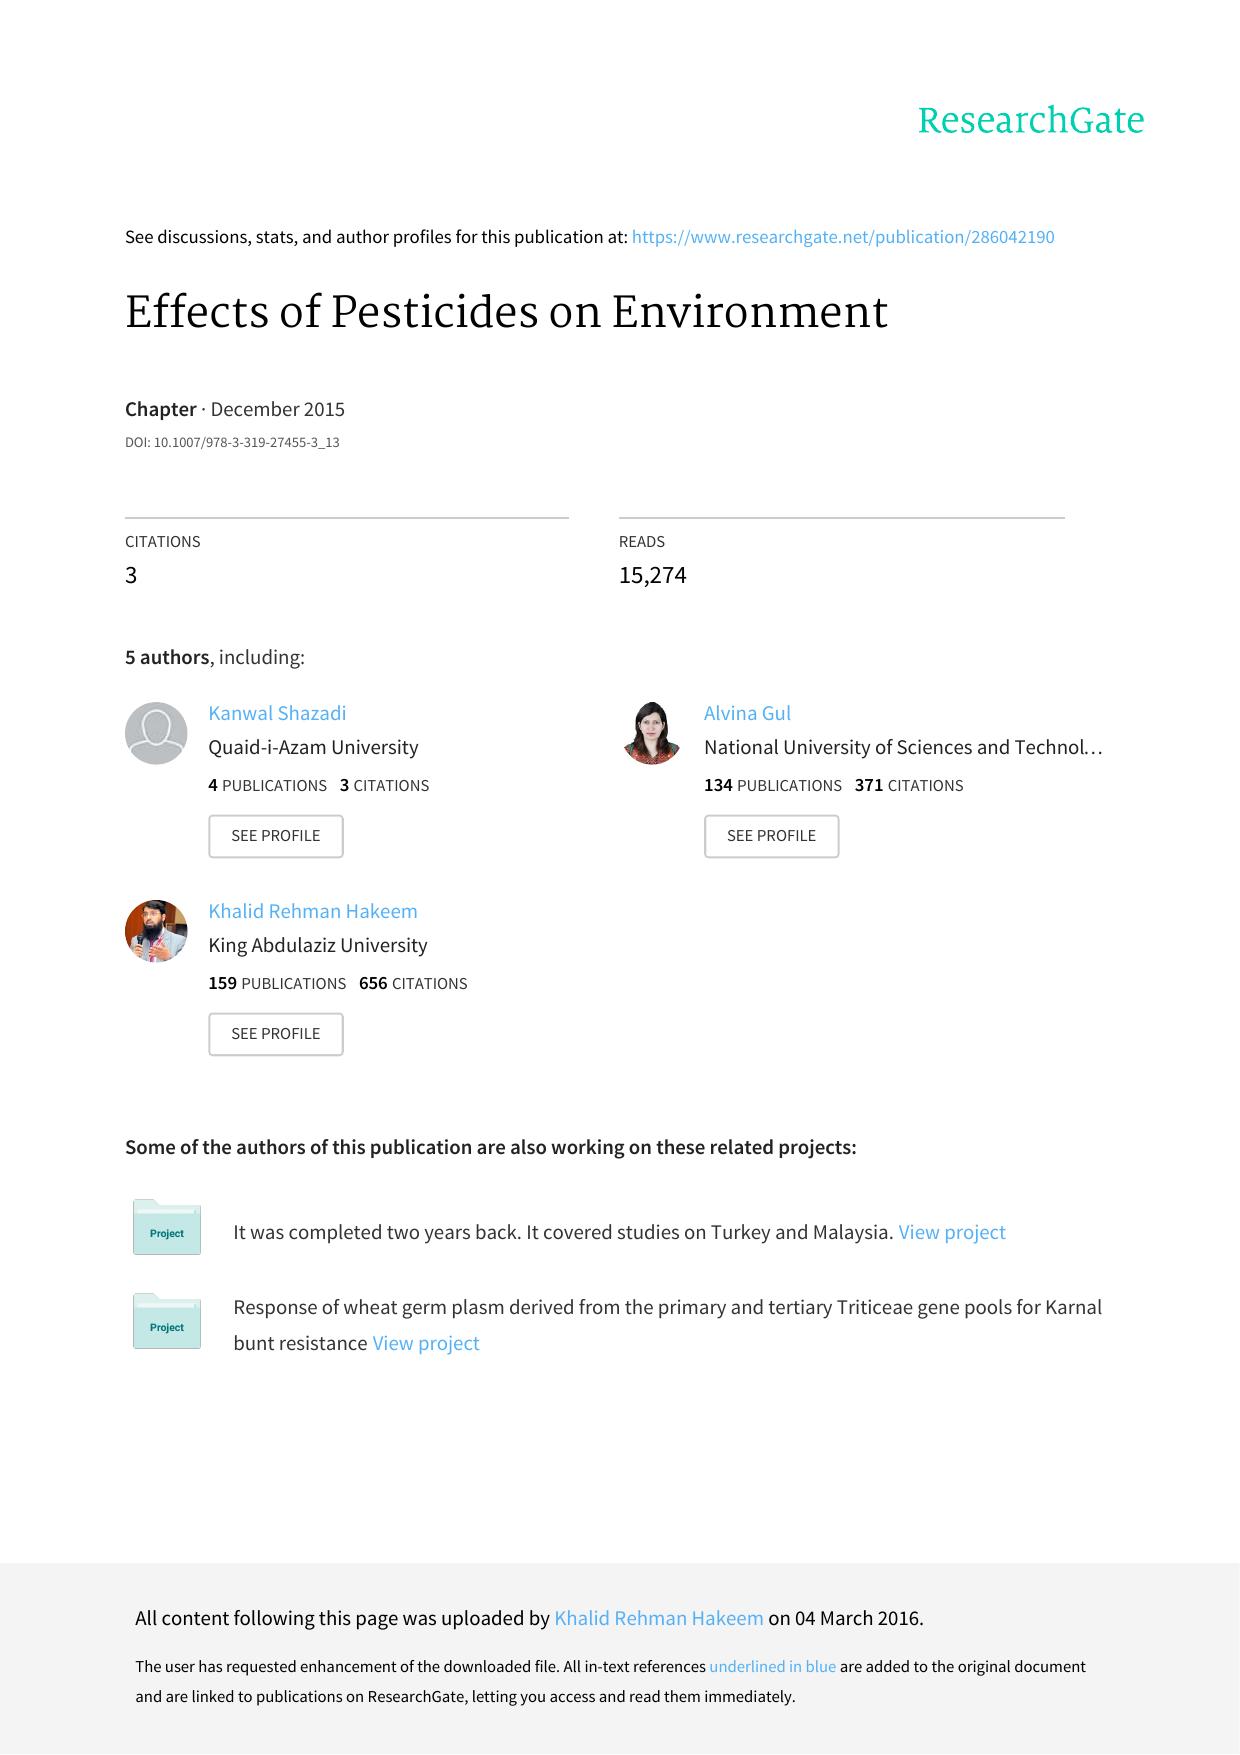 Effects of pesticides on the environment   2016